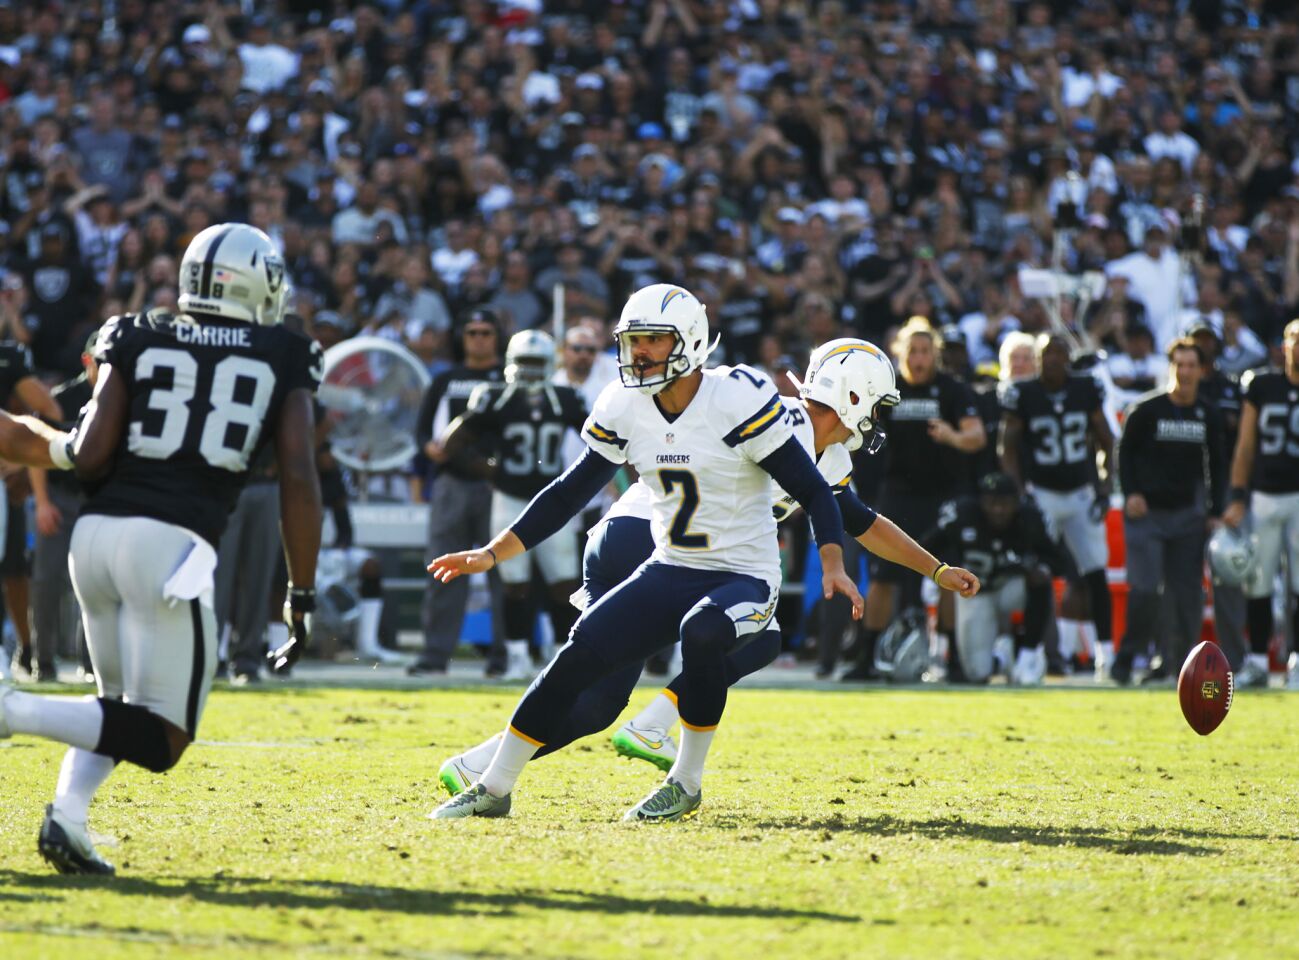 The snap gets by San Diego Chargers holder Drew Kaser on a game tying field goal attempt by Josh Lambo (2) in the 4th quarter in Oakland on Oct. 9, 2016. (Photo by K.C. Alfred/The San Diego Union-Tribune)